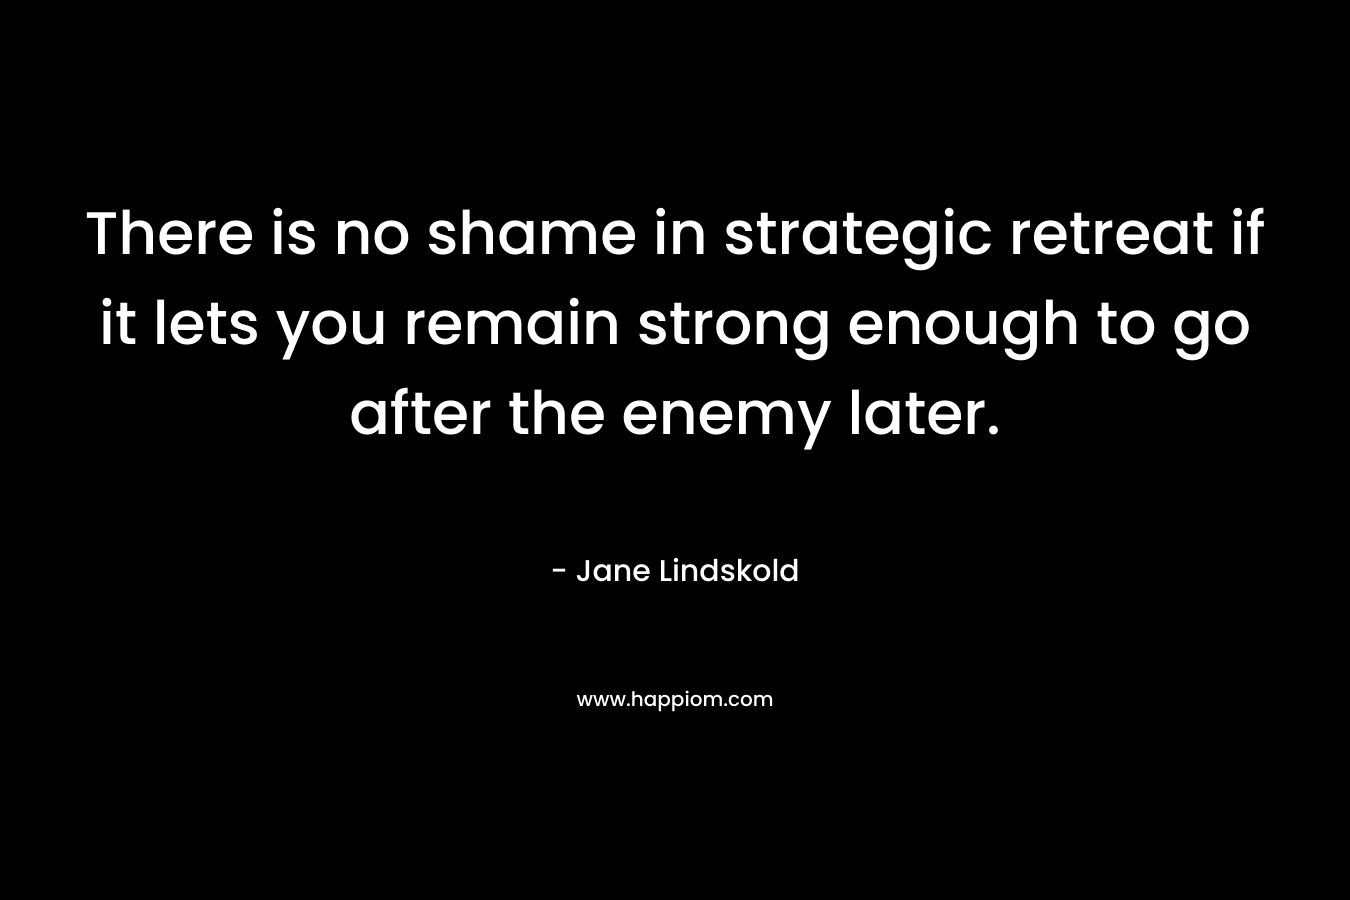 There is no shame in strategic retreat if it lets you remain strong enough to go after the enemy later. – Jane Lindskold